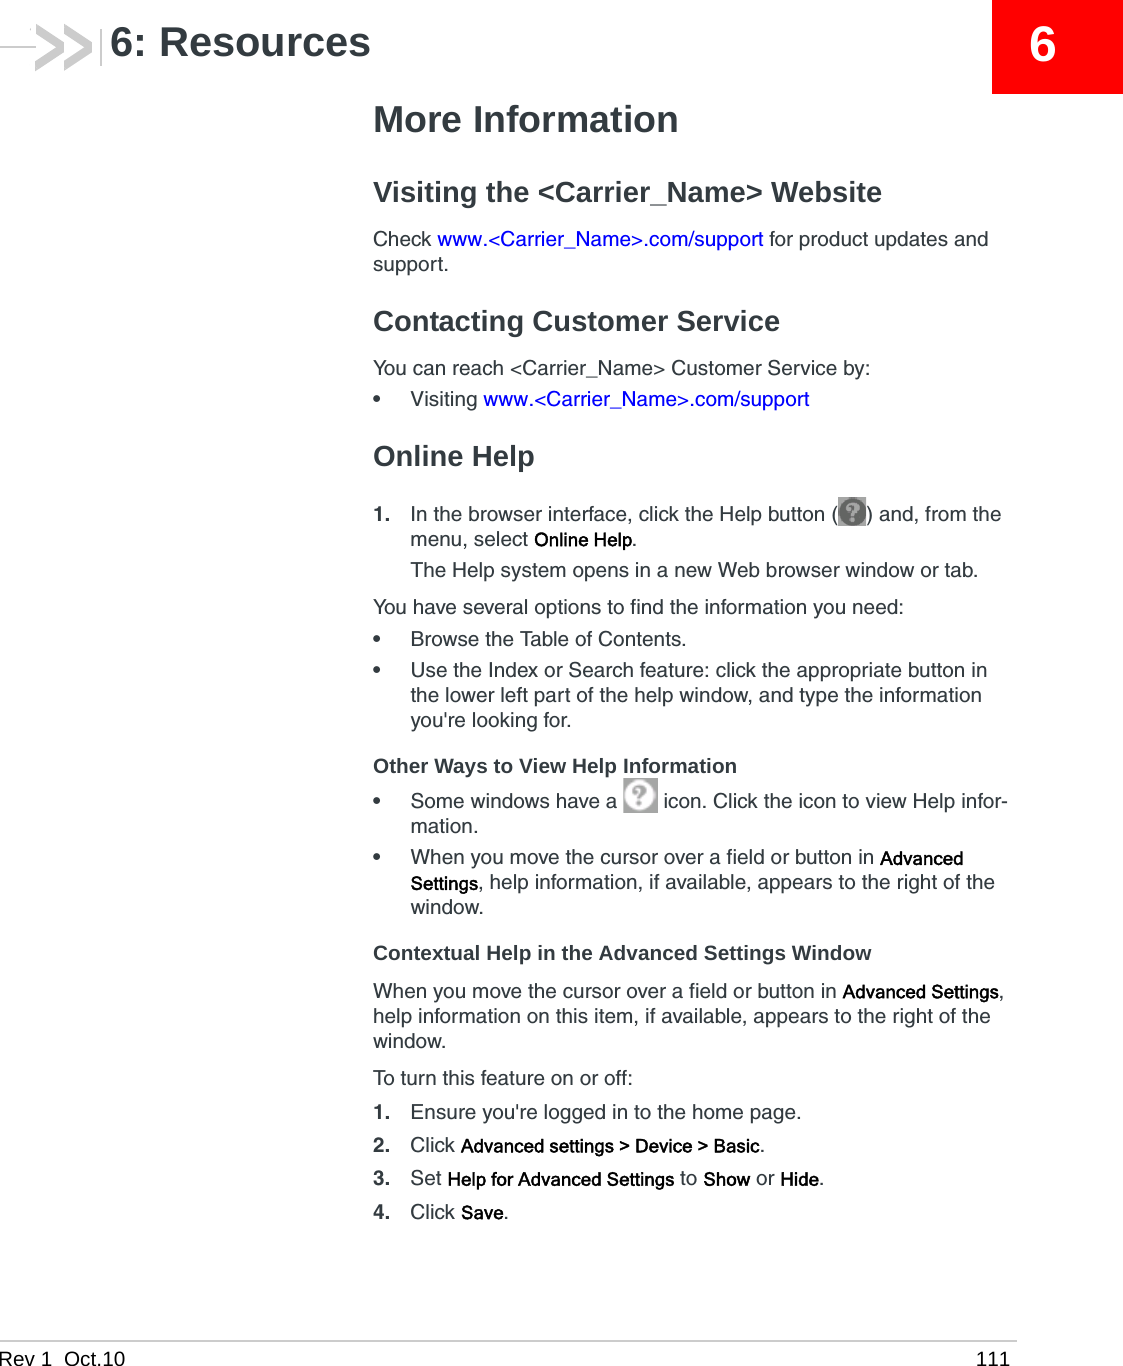 Rev 1  Oct.10 11166: ResourcesMore InformationVisiting the &lt;Carrier_Name&gt; WebsiteCheck www.&lt;Carrier_Name&gt;.com/support for product updates and support.Contacting Customer ServiceYou can reach &lt;Carrier_Name&gt; Customer Service by:•Visiting www.&lt;Carrier_Name&gt;.com/supportOnline Help1. In the browser interface, click the Help button ( ) and, from the menu, select Online Help.The Help system opens in a new Web browser window or tab.You have several options to find the information you need:•Browse the Table of Contents.•Use the Index or Search feature: click the appropriate button in the lower left part of the help window, and type the information you&apos;re looking for.Other Ways to View Help Information•Some windows have a   icon. Click the icon to view Help infor-mation.•When you move the cursor over a field or button in Advanced Settings, help information, if available, appears to the right of the window.Contextual Help in the Advanced Settings WindowWhen you move the cursor over a field or button in Advanced Settings, help information on this item, if available, appears to the right of the window.To turn this feature on or off:1. Ensure you&apos;re logged in to the home page.2. Click Advanced settings &gt; Device &gt; Basic.3. Set Help for Advanced Settings to Show or Hide.4. Click Save.